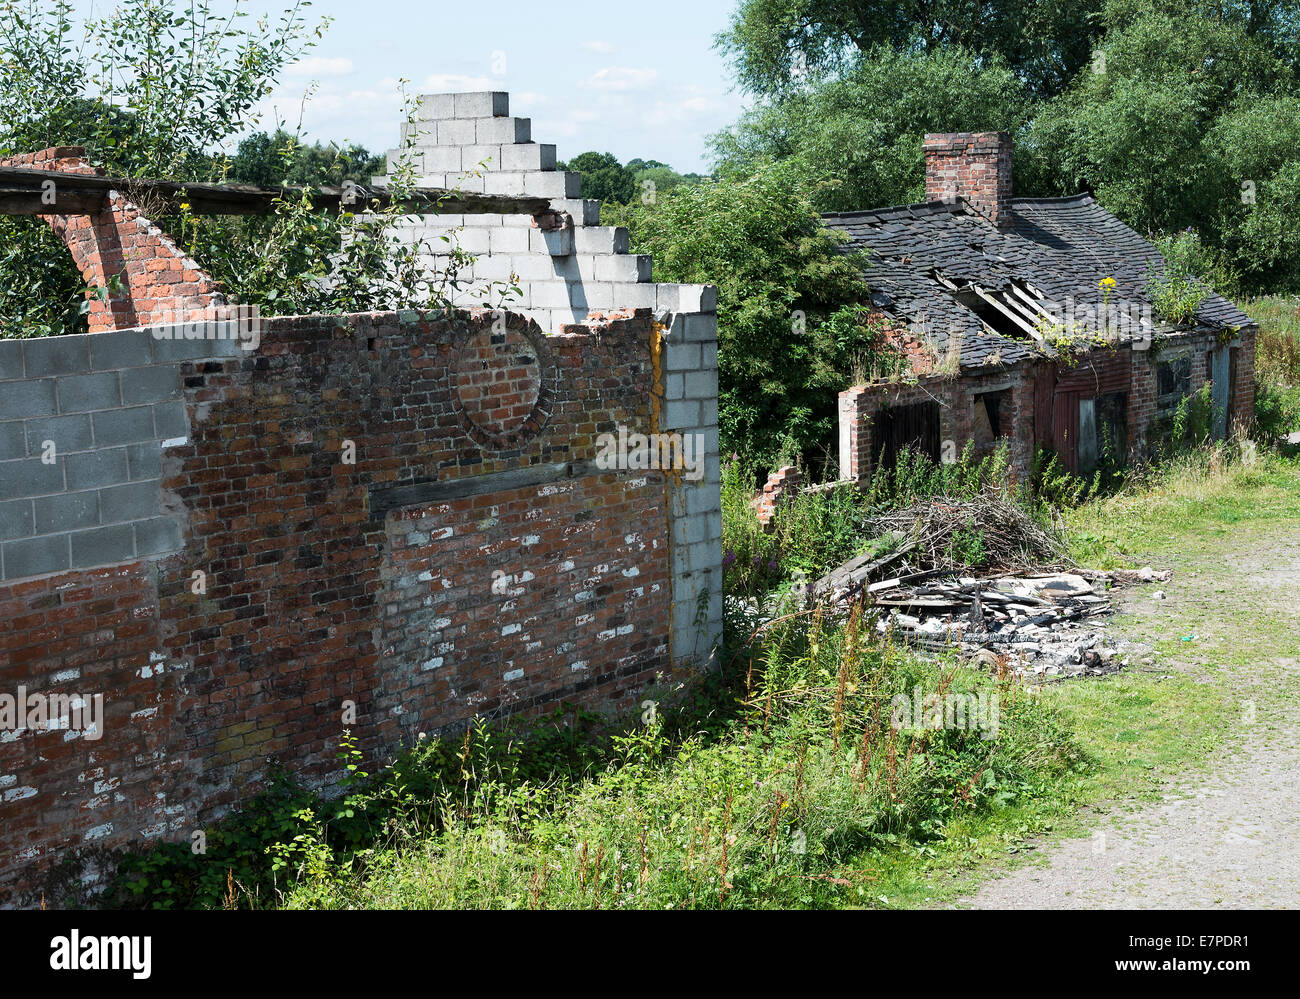 Dilapidated and Run Down Building on the Trent and Mersey Canal at Rode Heath Cheshire England United Kingdom UK Stock Photo